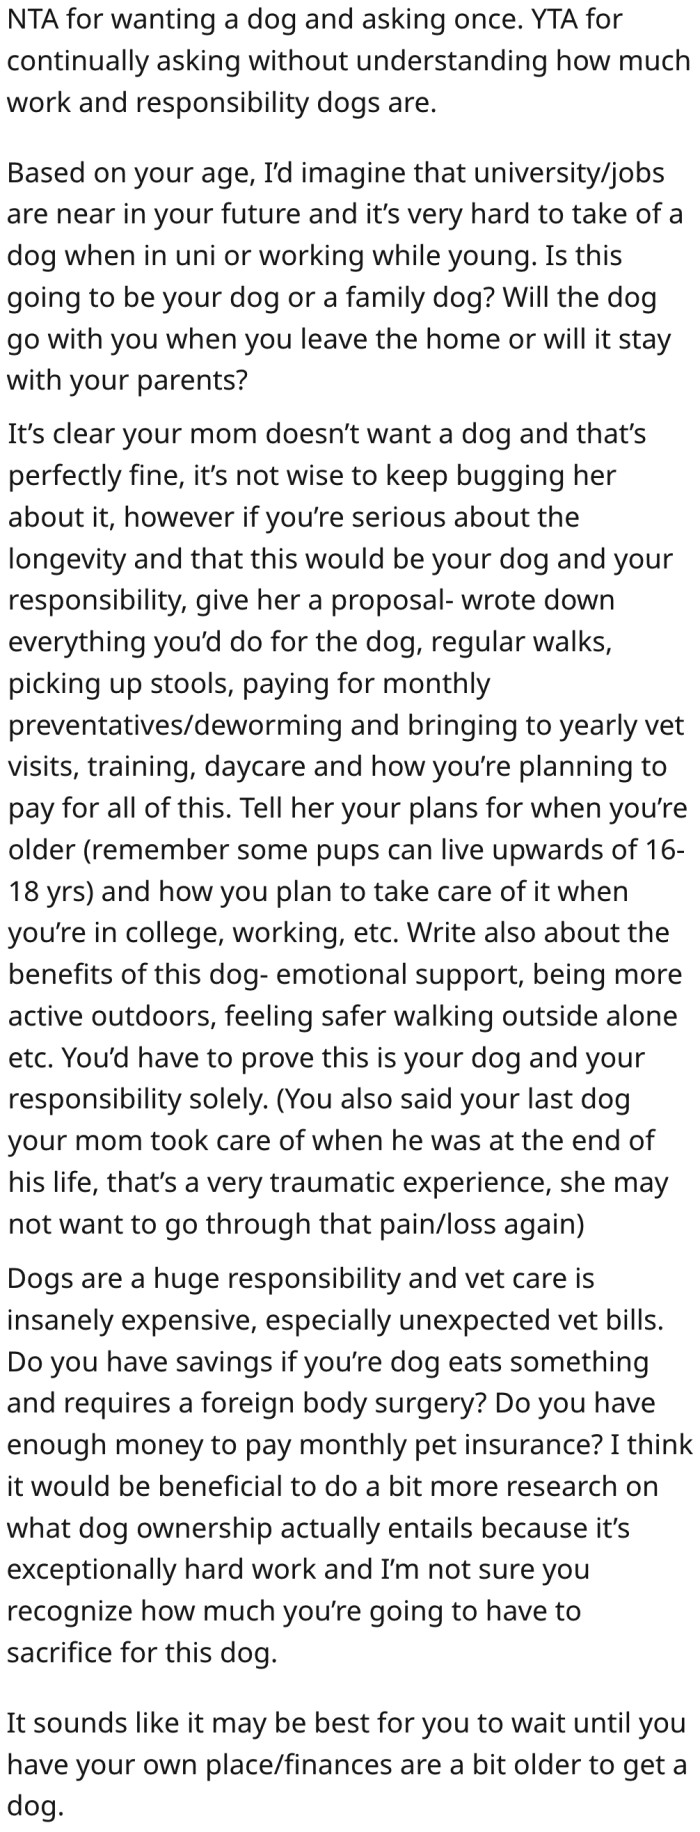 20. If she's serious about caring for the dog long-term, she should draft a detailed plan and show it to her mom.